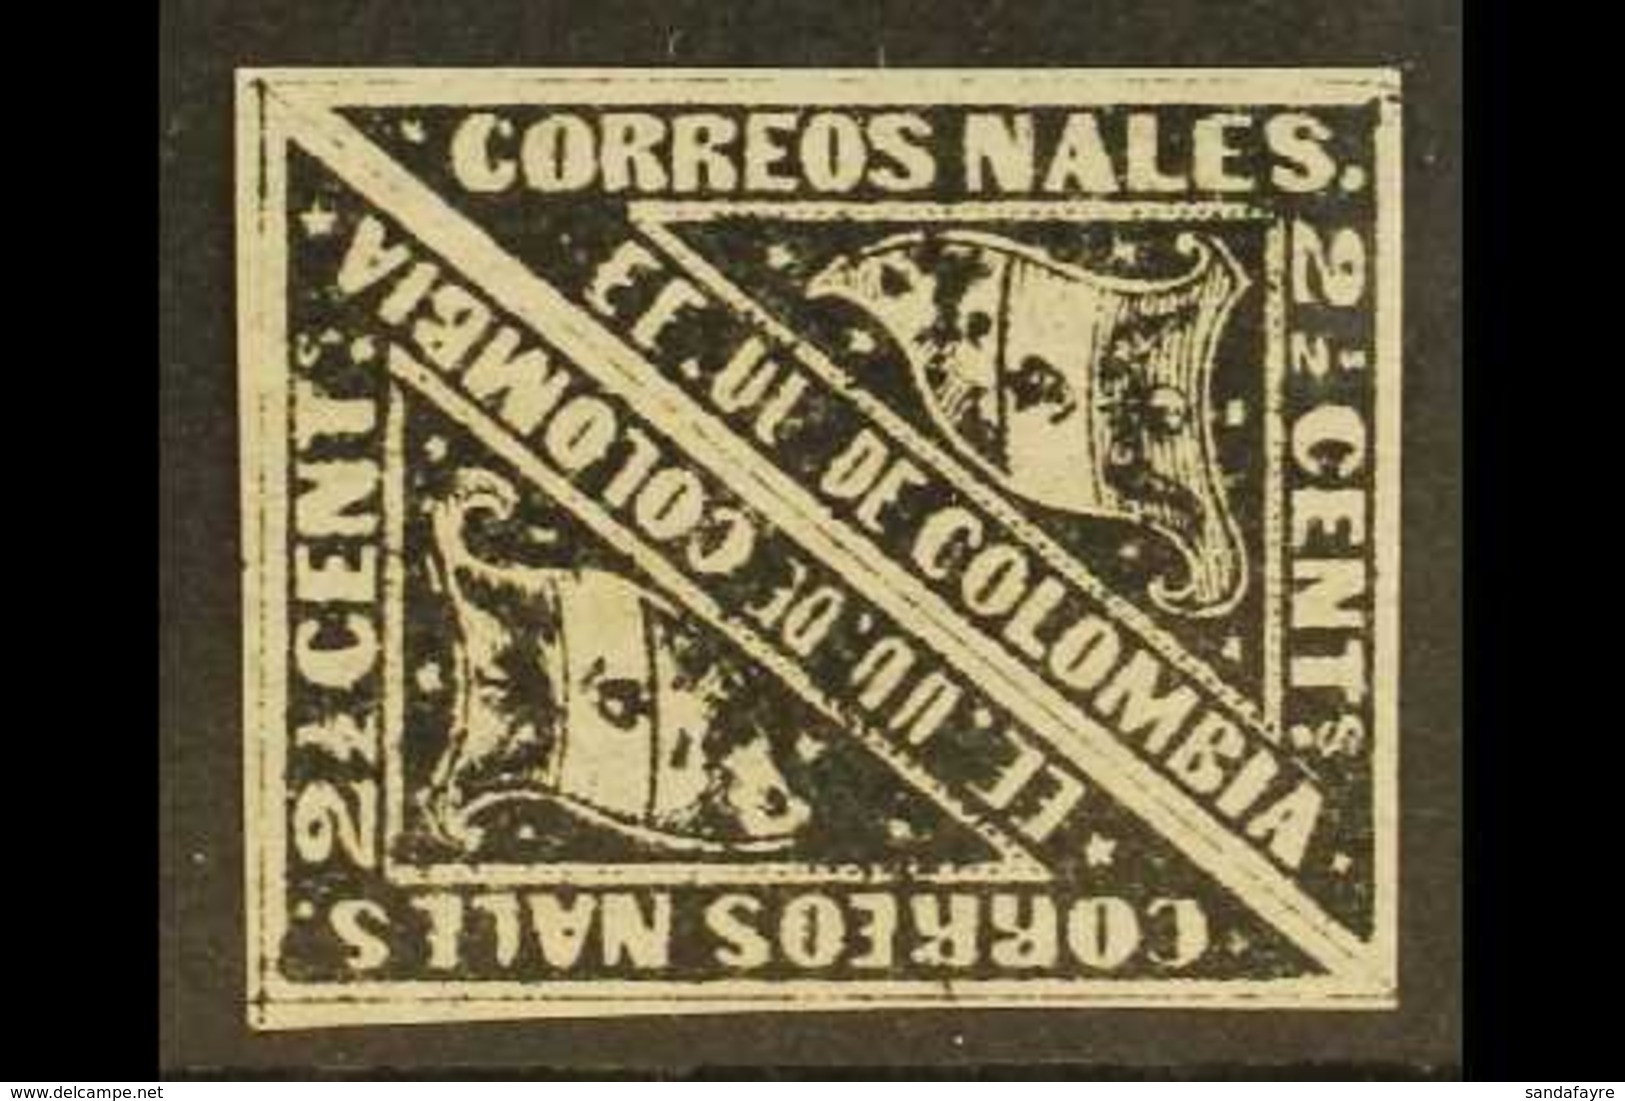 1869-70  2½c Black Carrier Stamp On Laid Paper, Scott 59a, An Attractive Fine Mint PAIR With Good Margins All Round. (2  - Colombia